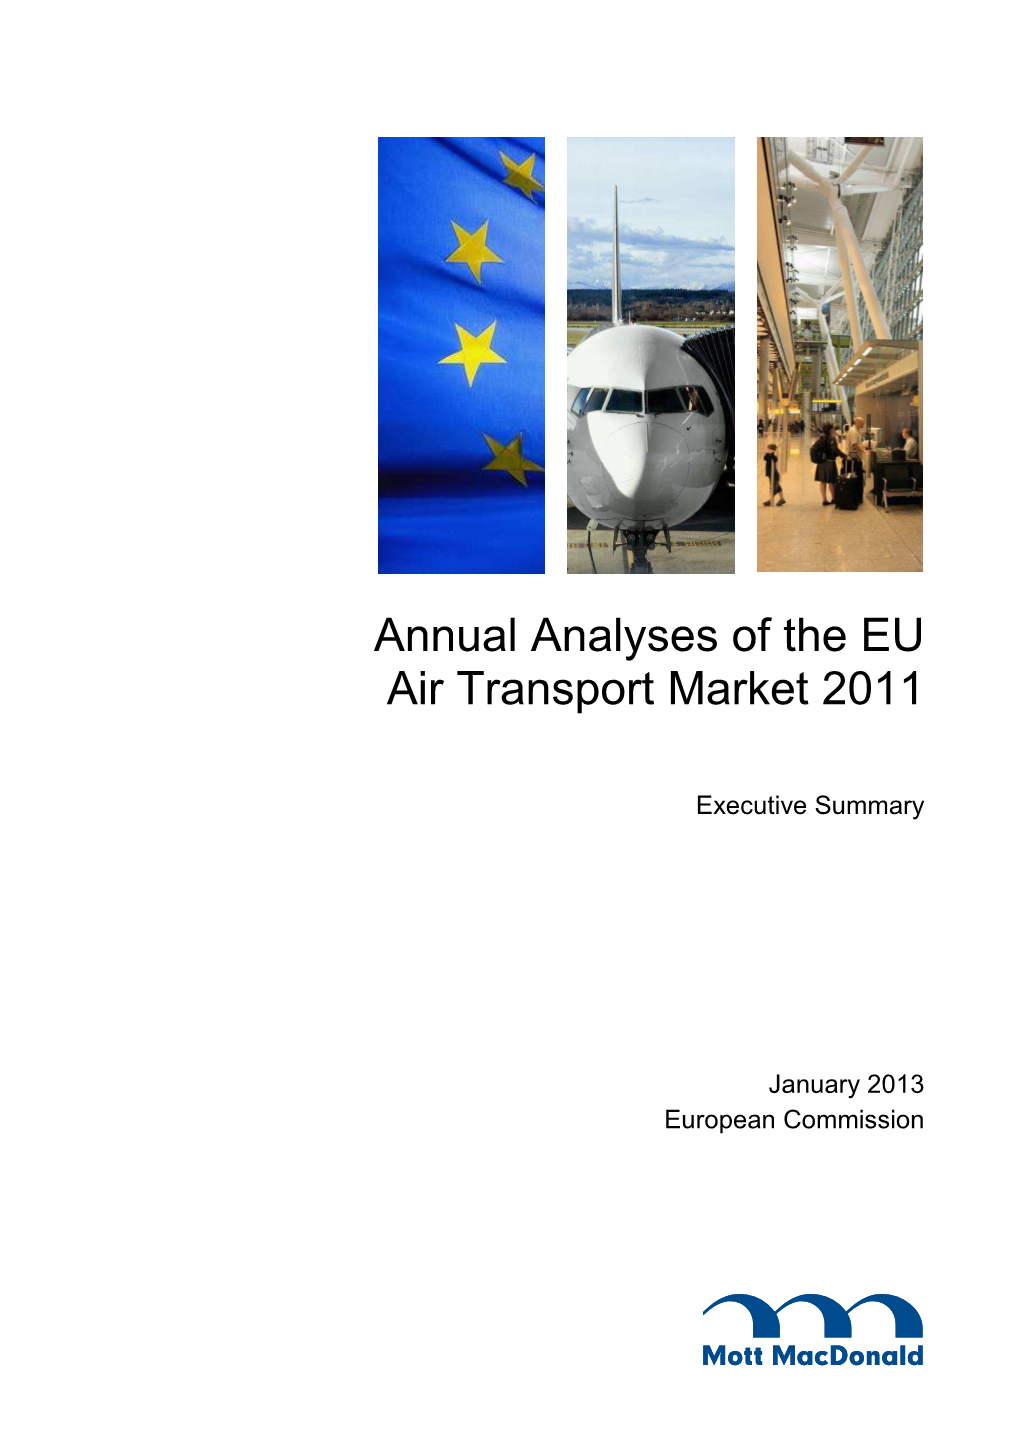 Annual Analyses of the EU Air Transport Market 2011